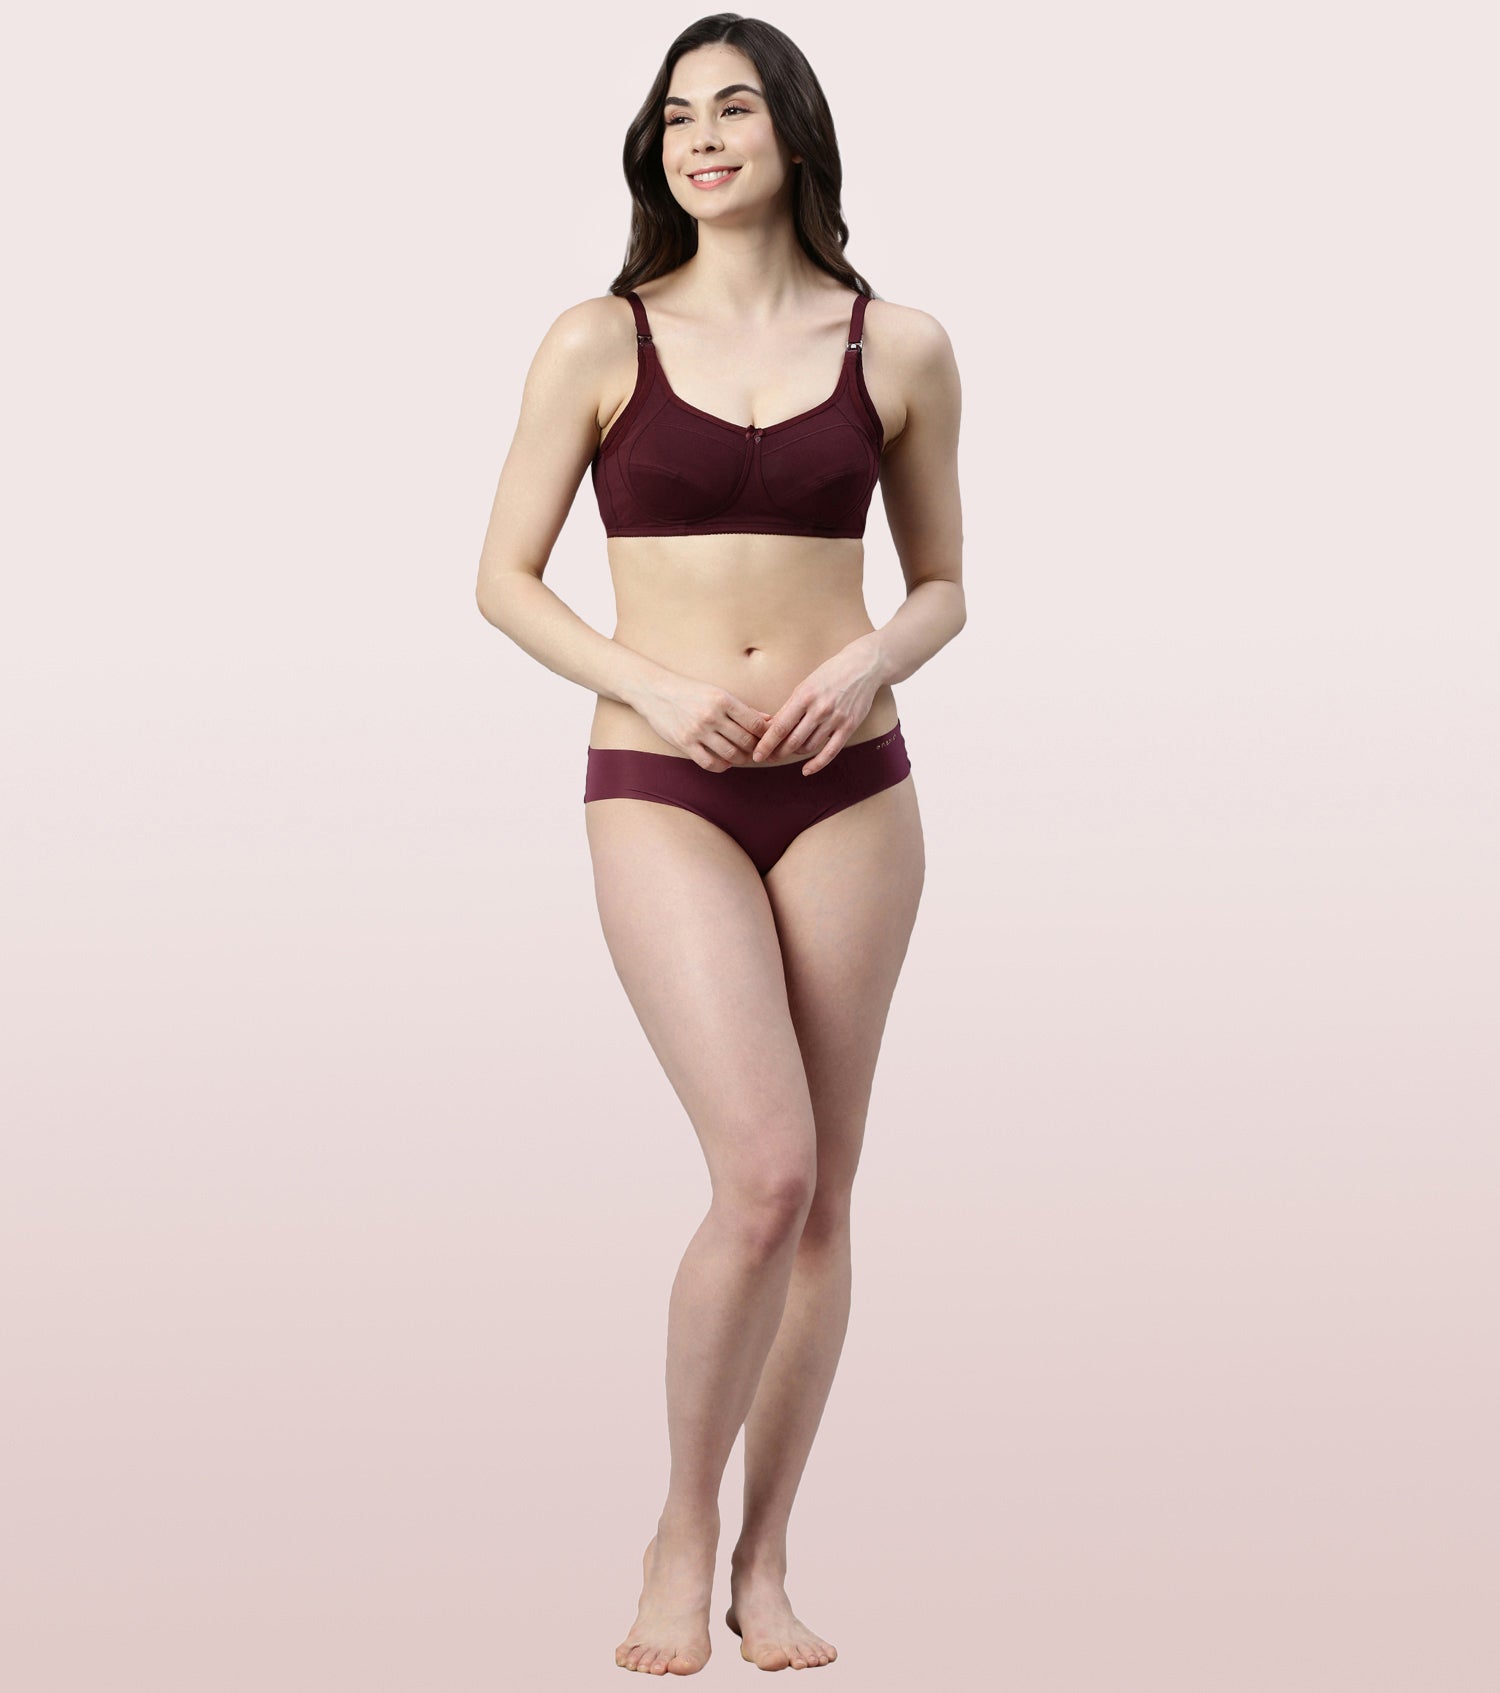 Buy Enamor High Coverage, Wirefree MT02 Sectioned Lift and Support  Eco-Melange Cotton Women Maternity/Nursing Non Padded Bra Online at Best  Prices in India